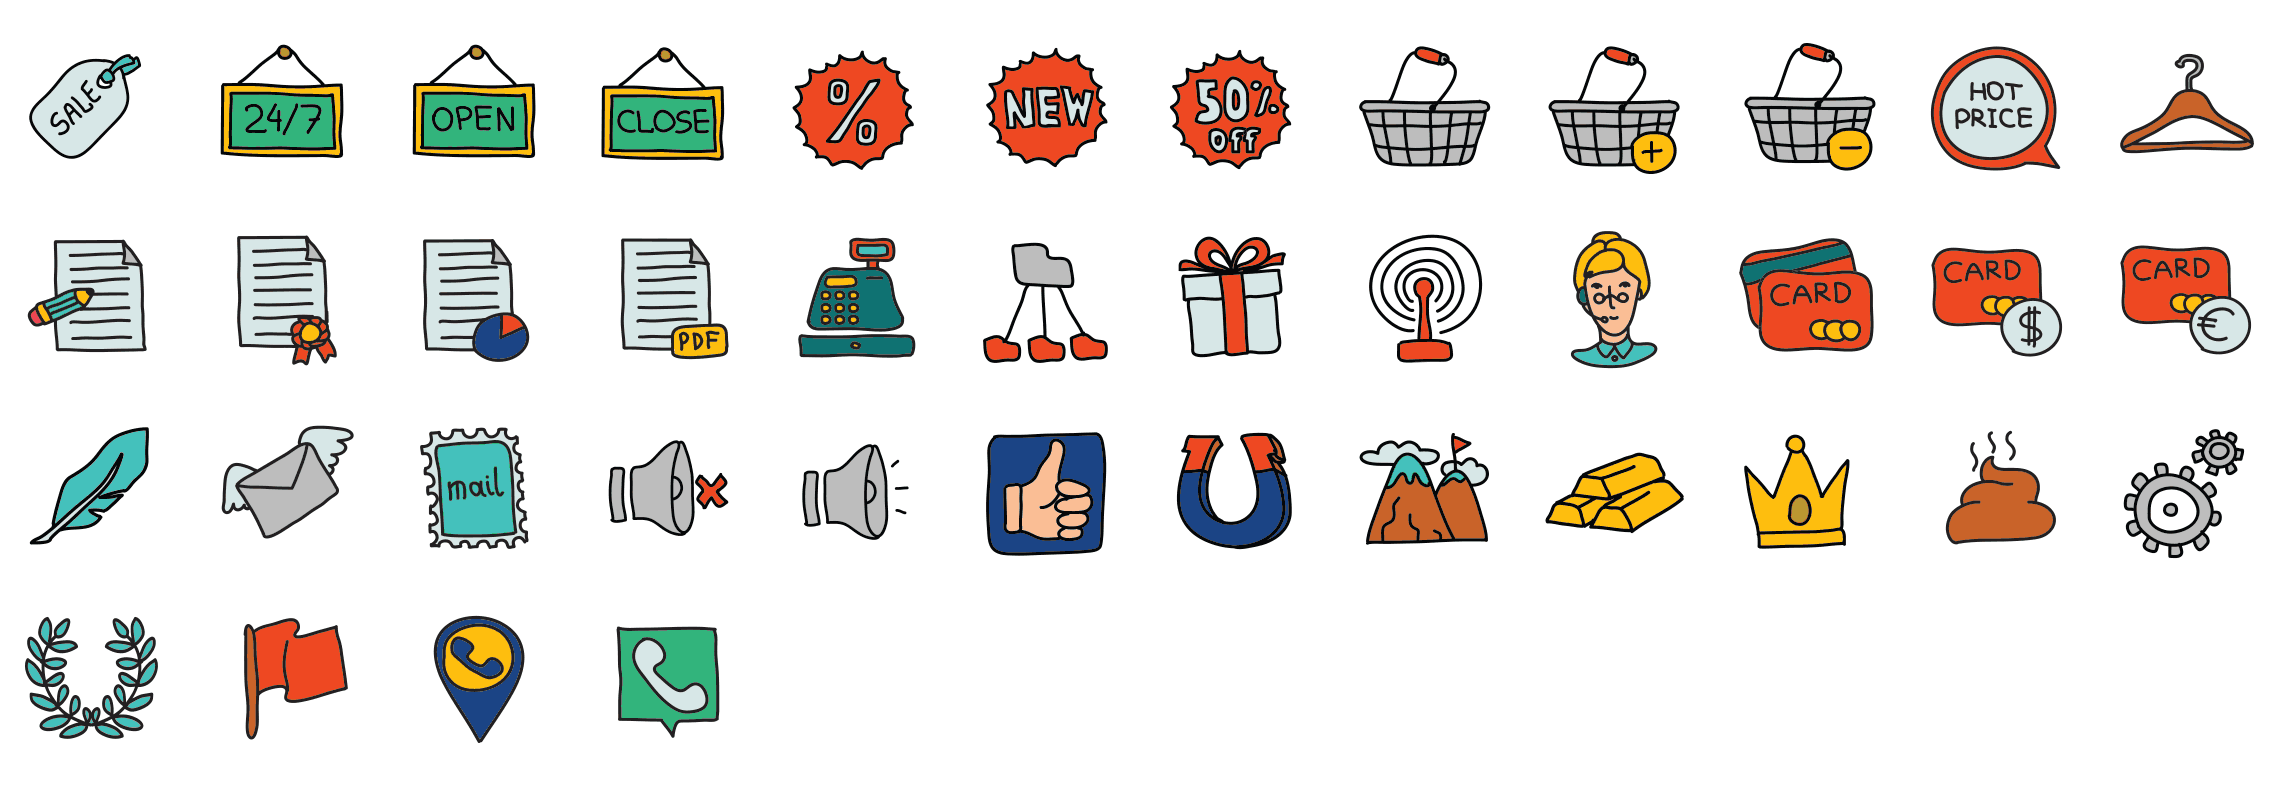 Shopping-doodle-icons